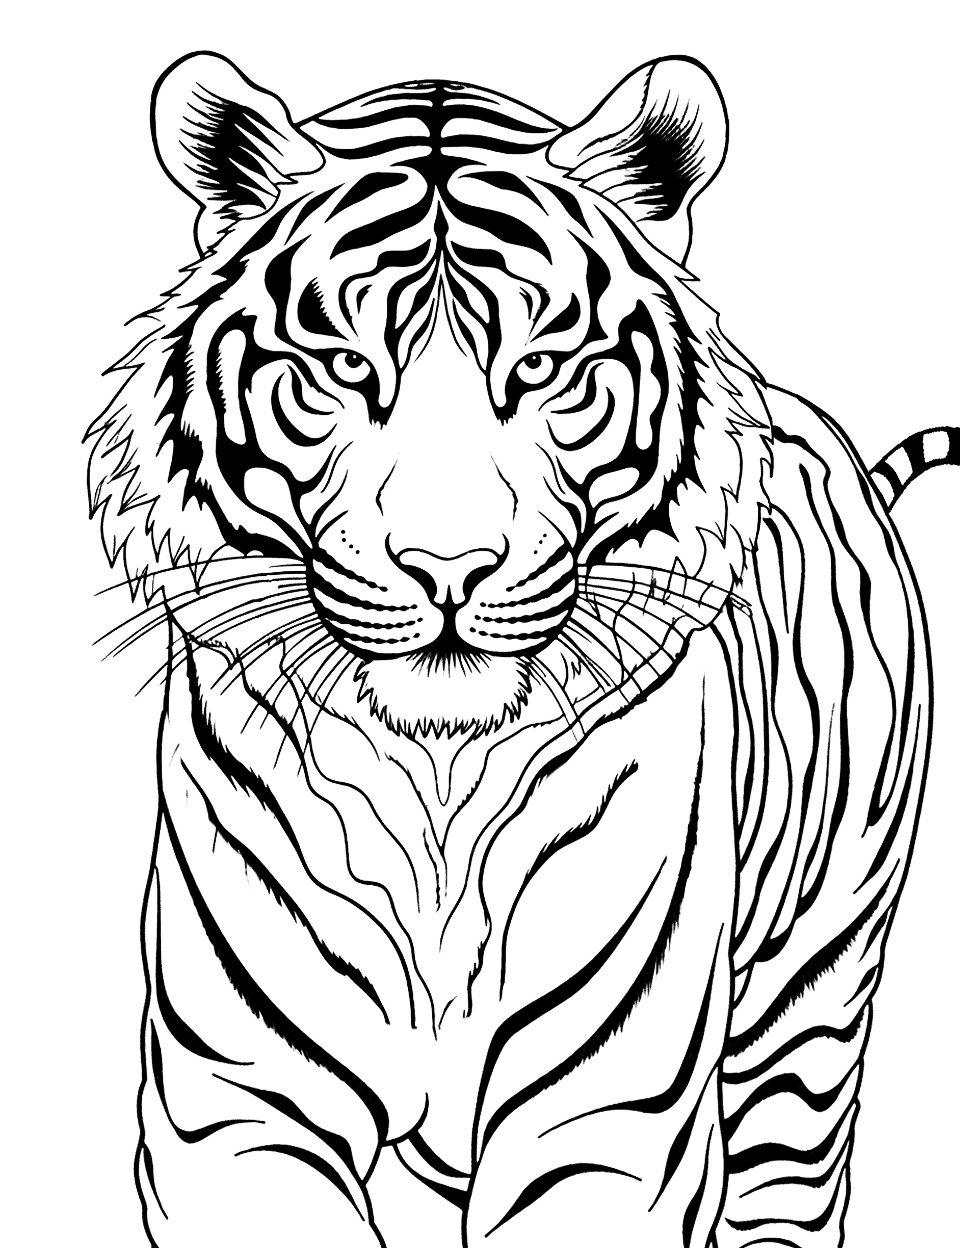 Advanced Artistic Tiger Coloring Page - An intricately patterned tiger that’s great for older kids who love detailed coloring.